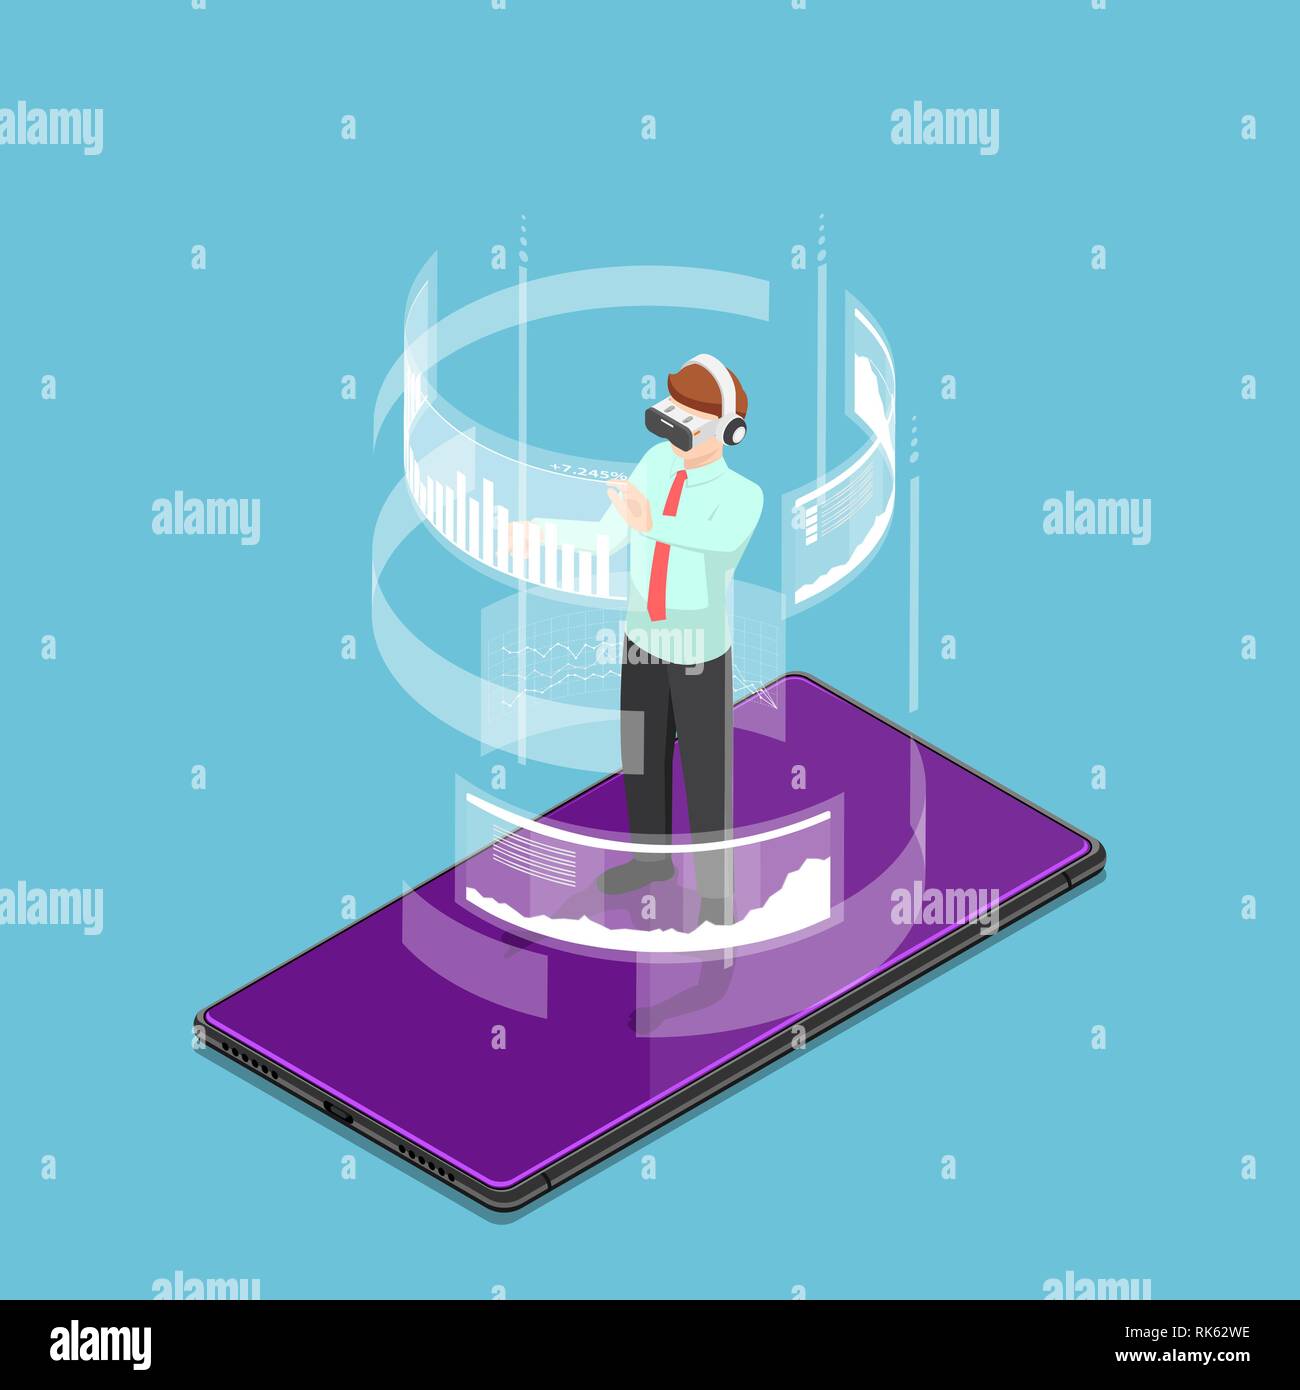 Flat 3d isometric businessman wearing virtual reality headset and standing on smartphone. Augmented and virtual reality technology concept. Stock Vector